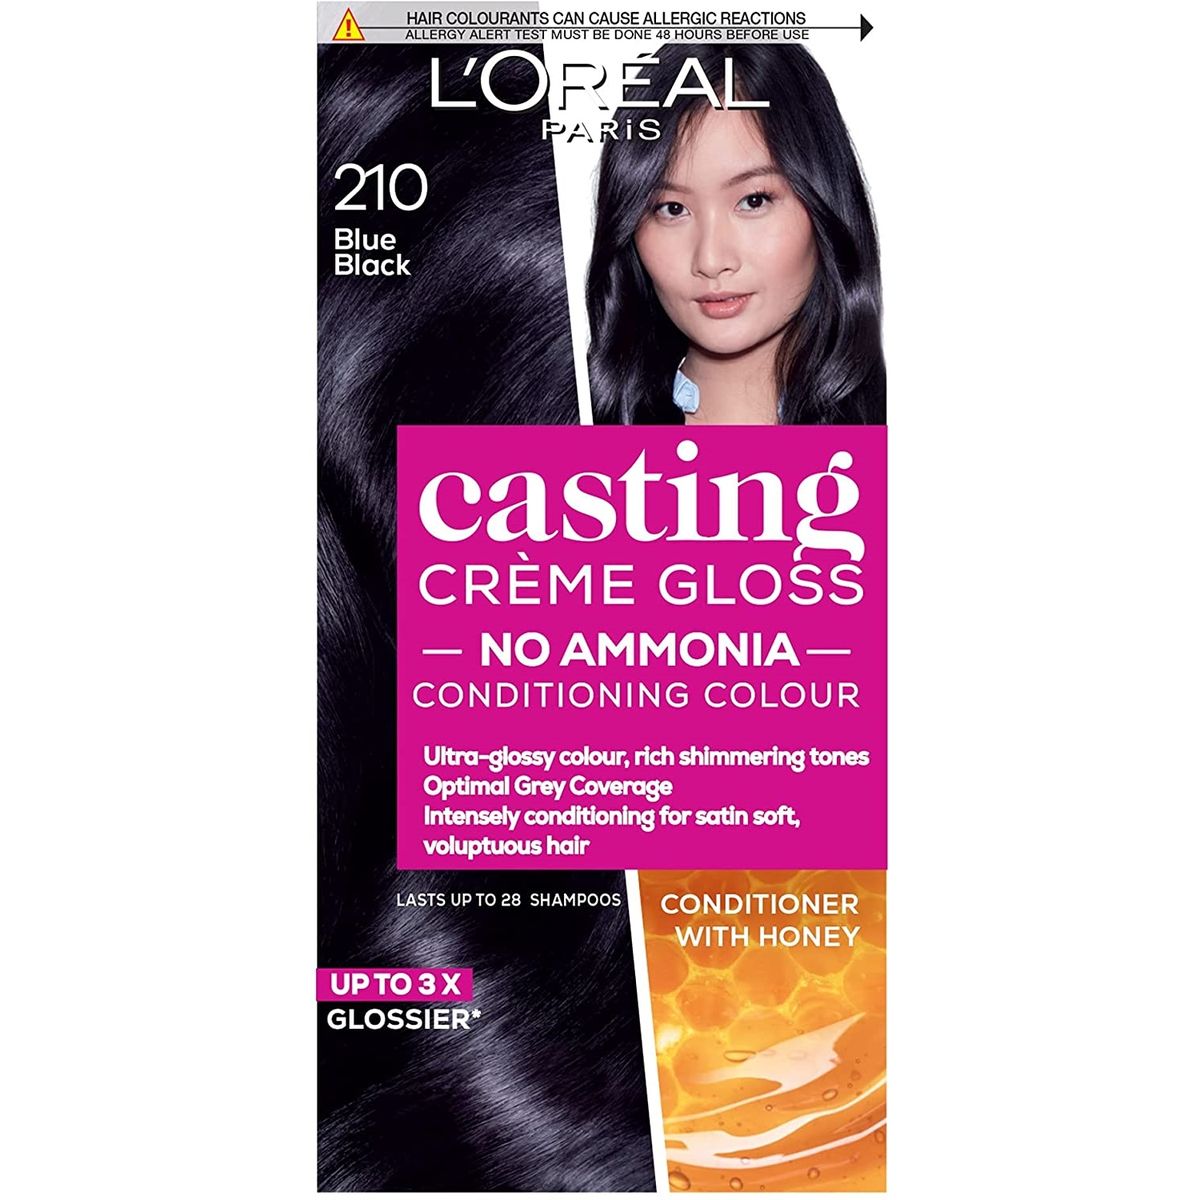 LOreal Casting Creme Gloss Hair Colour Dye 210 Blue Black | Buy Online in  South Africa 